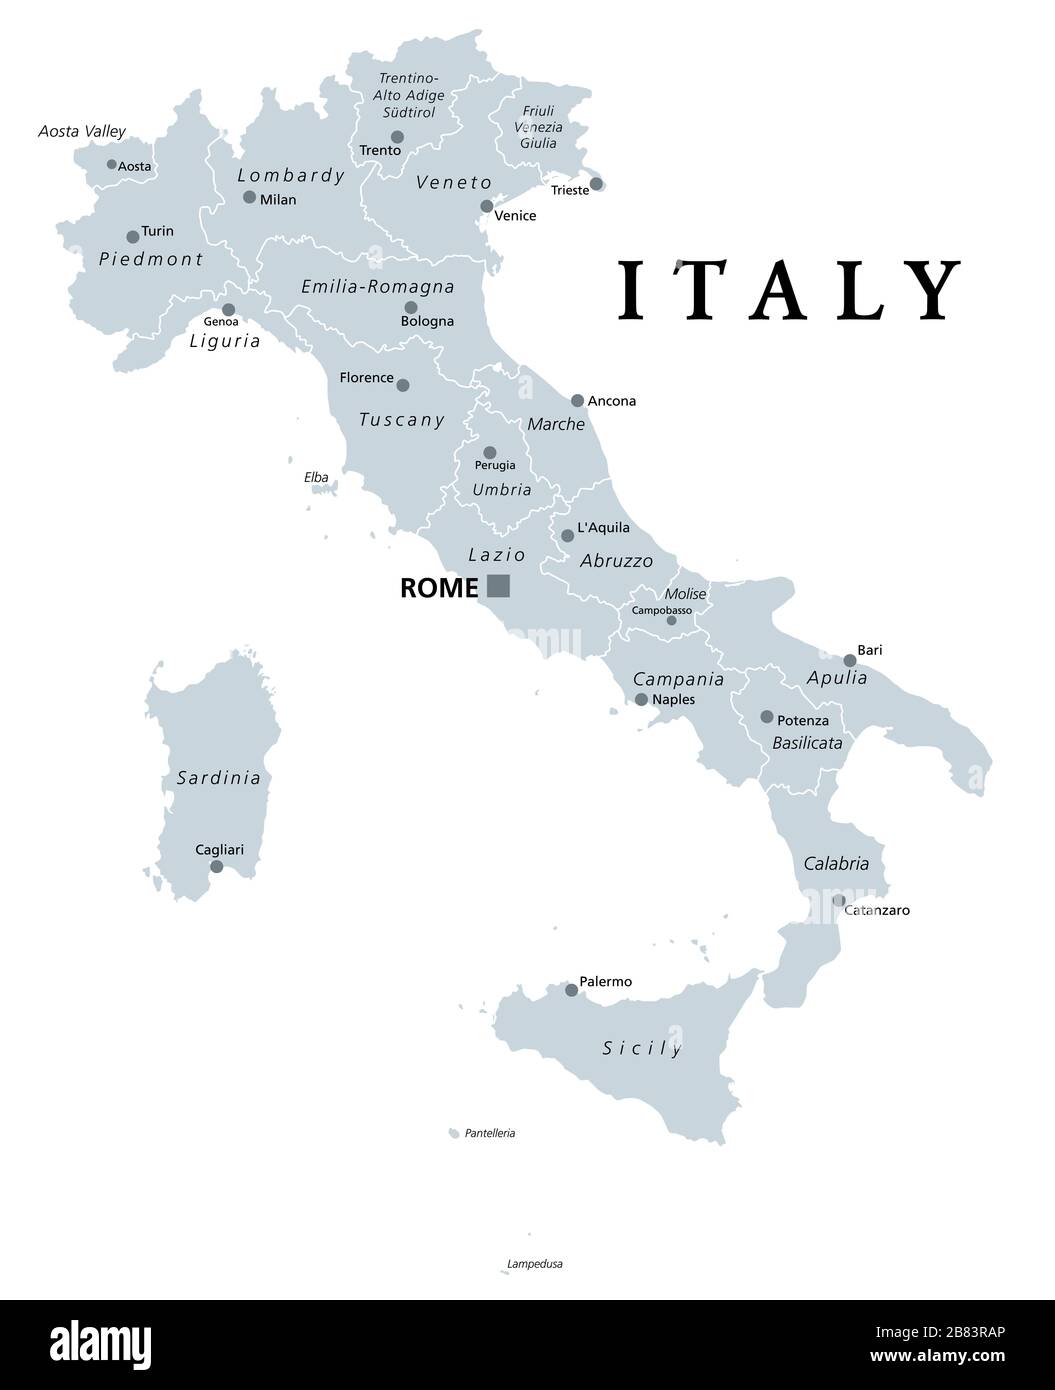 Italy, gray political map with administrative divisions. Italian Republic with capital Rome, 20 regions, their borders and capitals. English labeling. Stock Photo